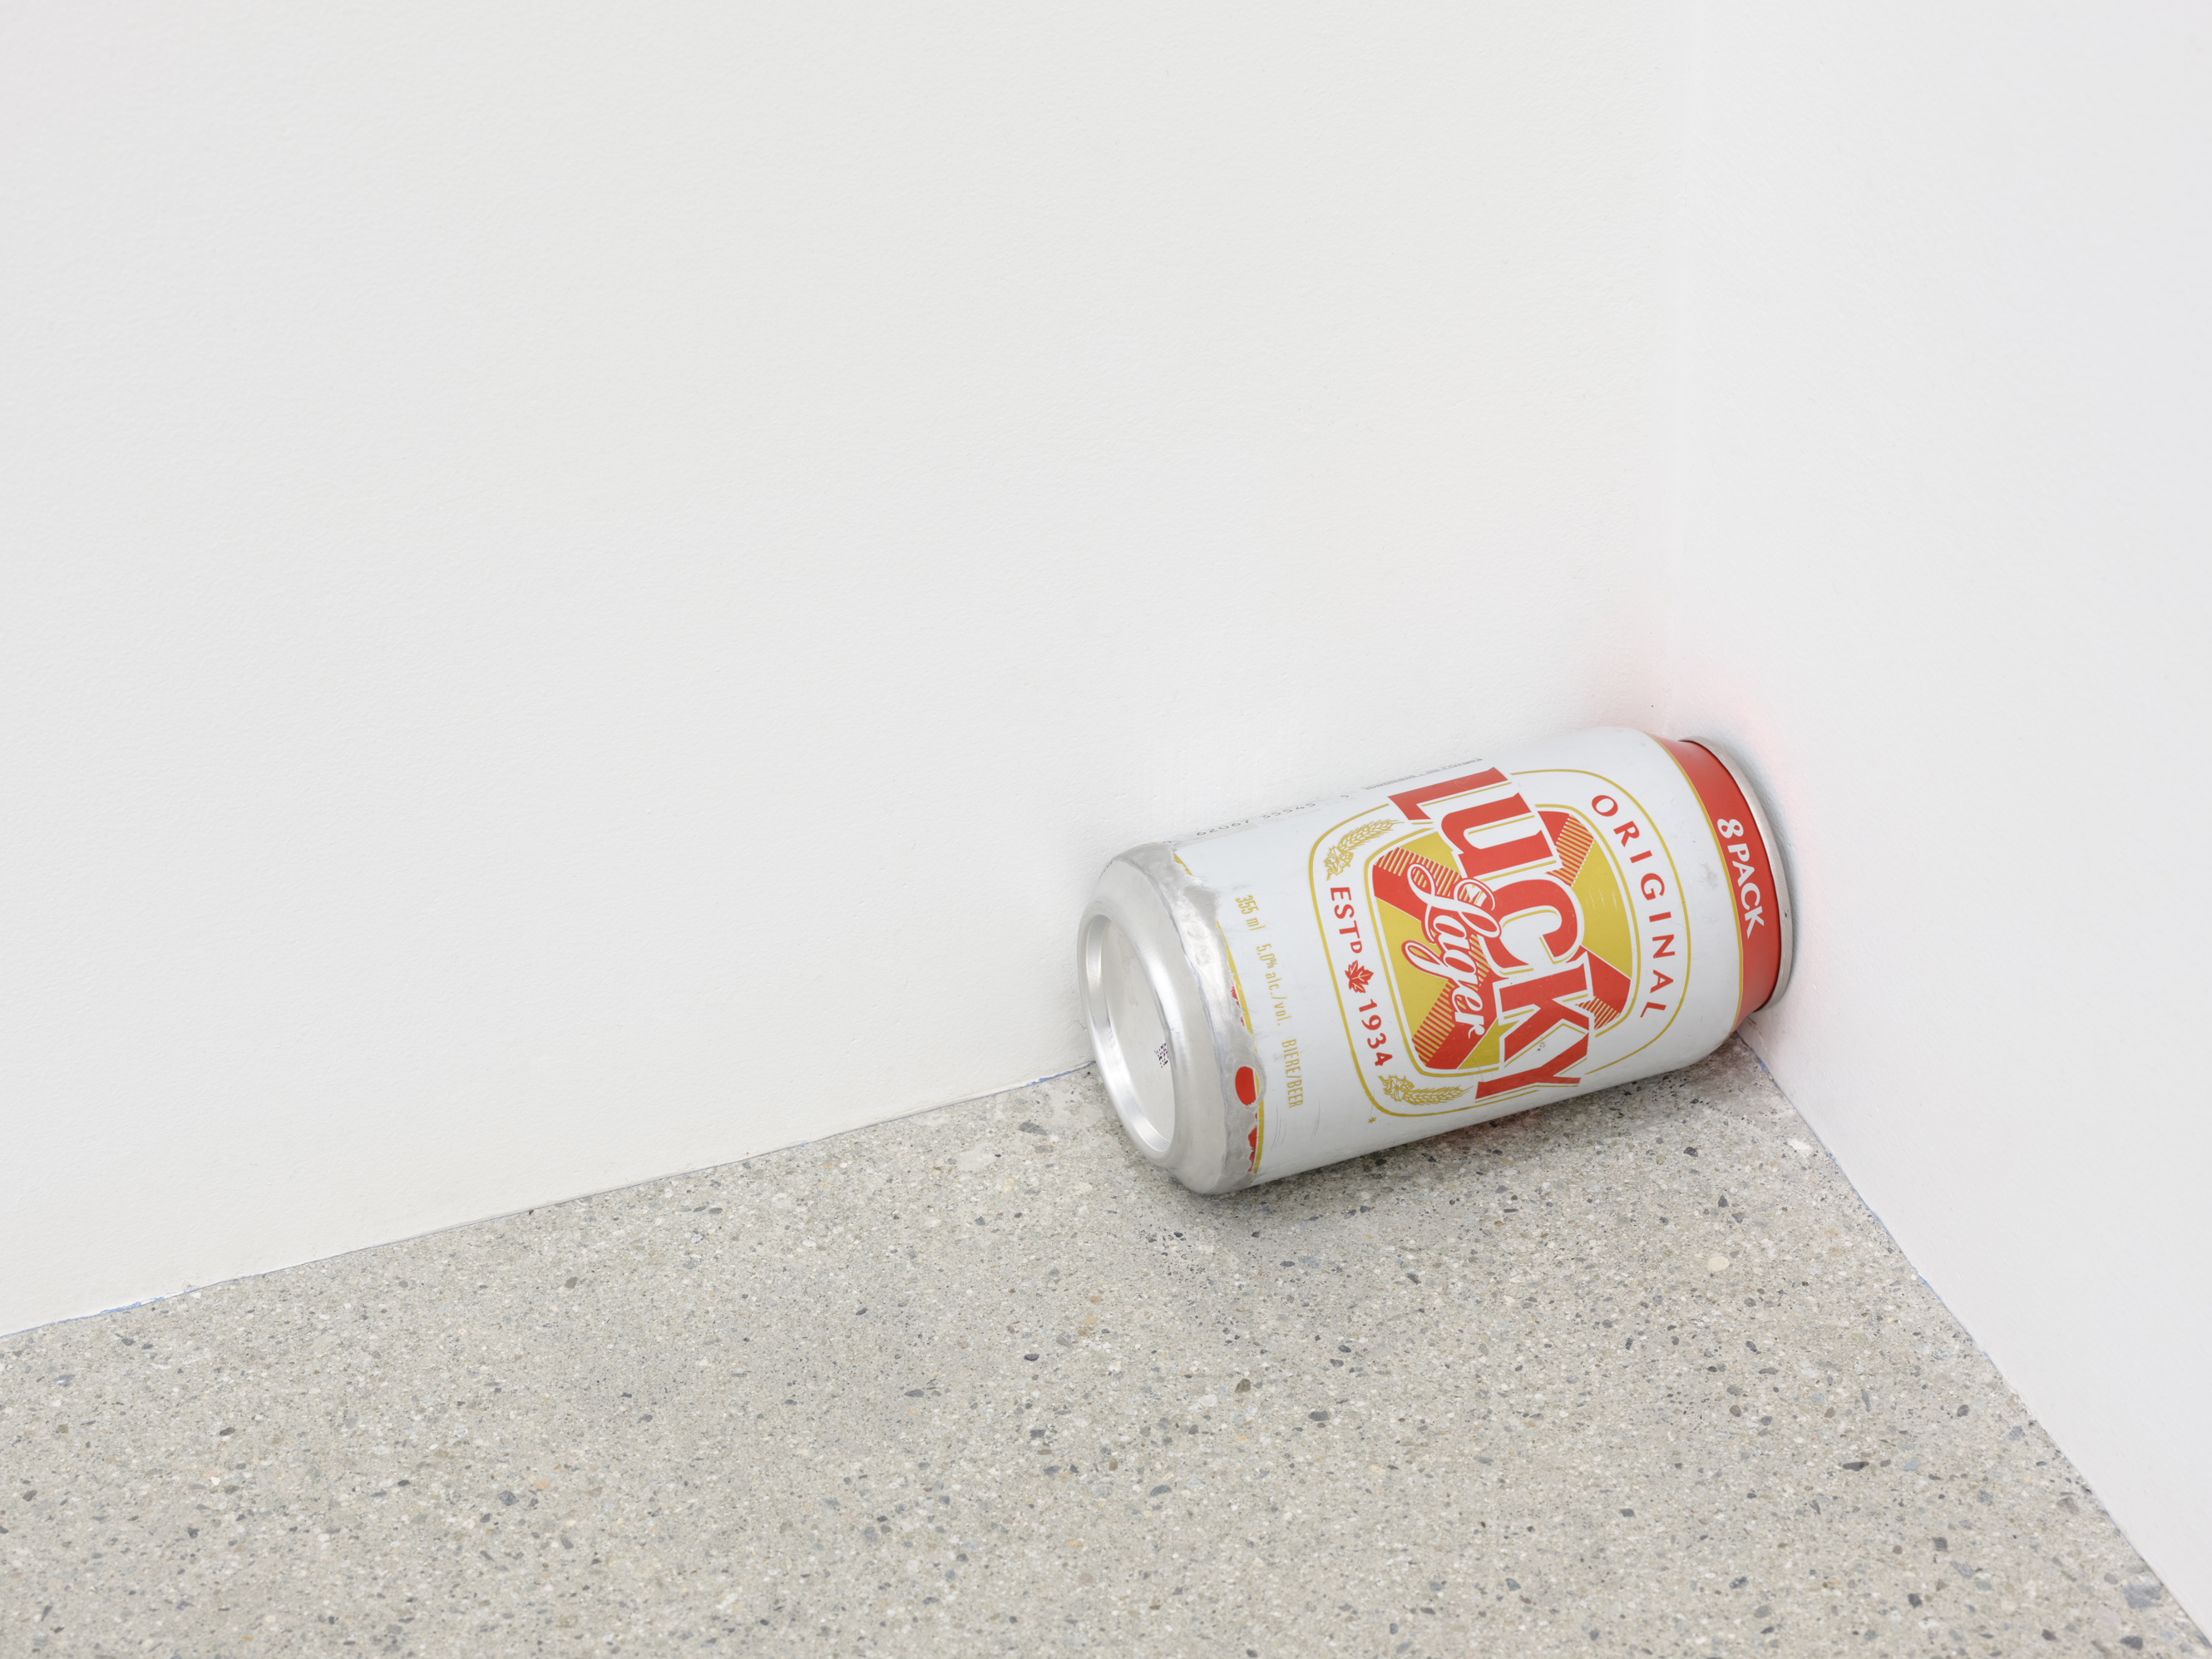 ​Raymond Boisjoly, Always Some Number of Things (detail), 2021 beer can on wall 118 x 148 in. (299.7 x 375.9 cm) by 